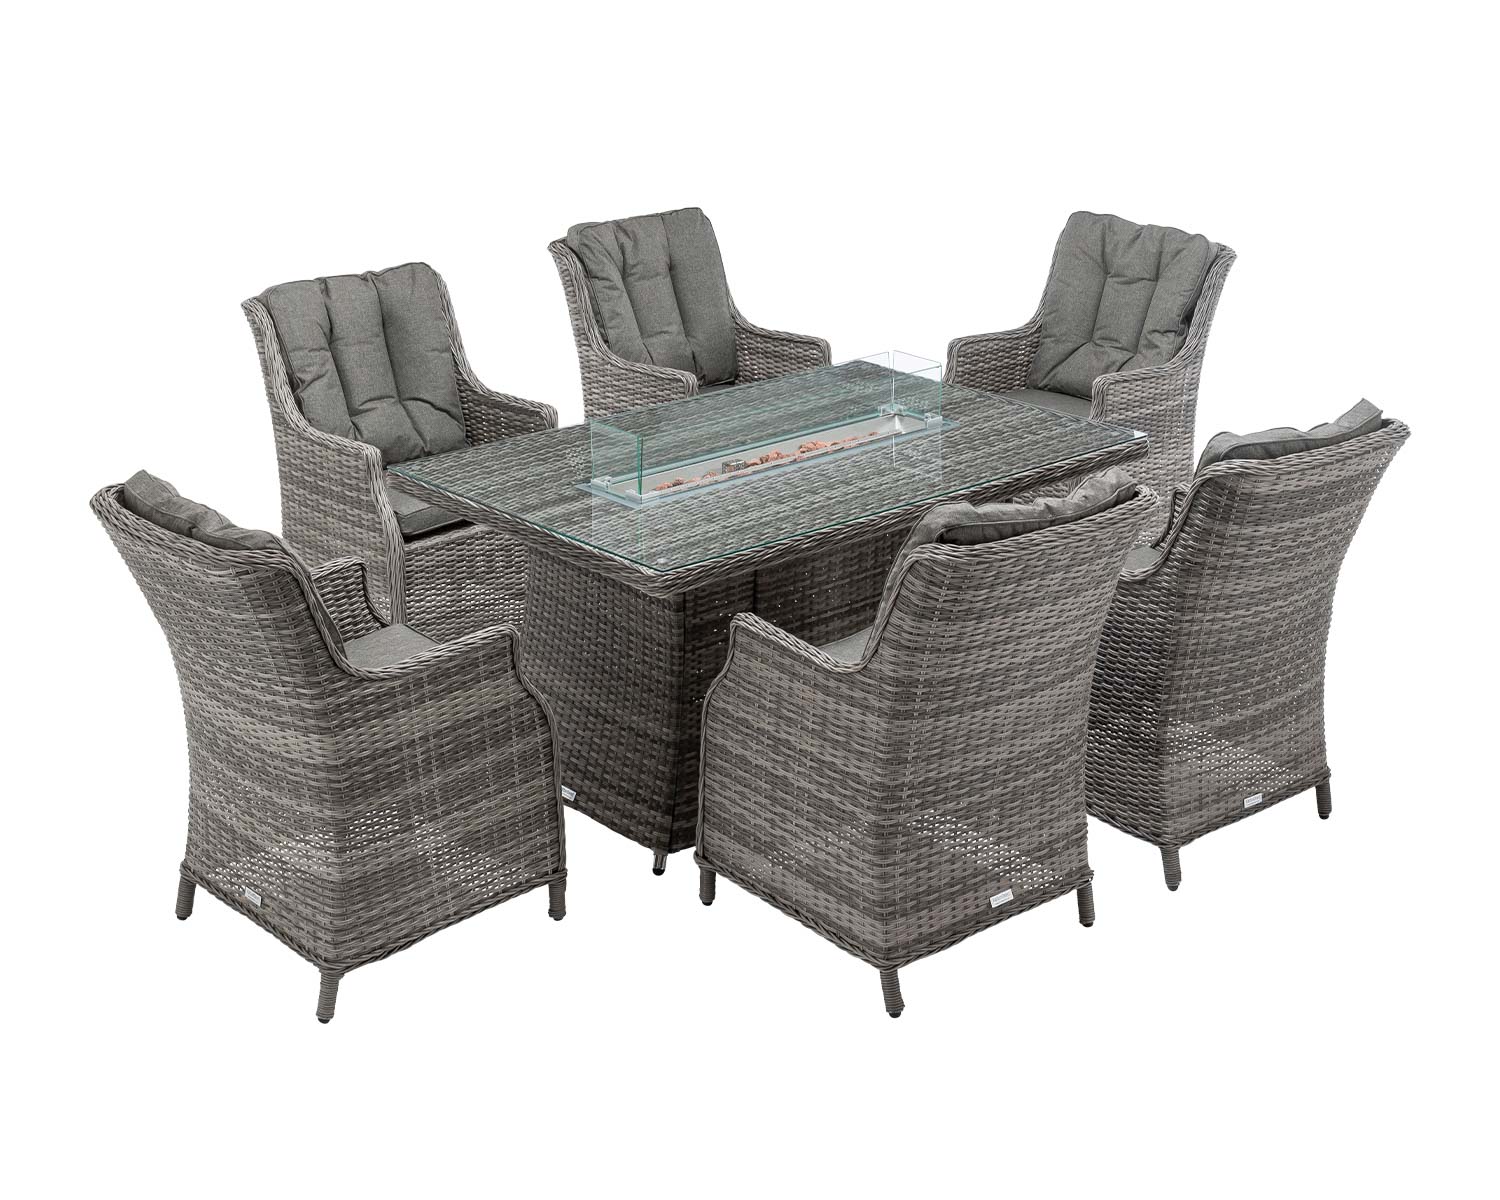 6 Seat Rattan Garden Dining Set With Rectangular Table In Grey With Fire Pit Riviera Rattan Direct